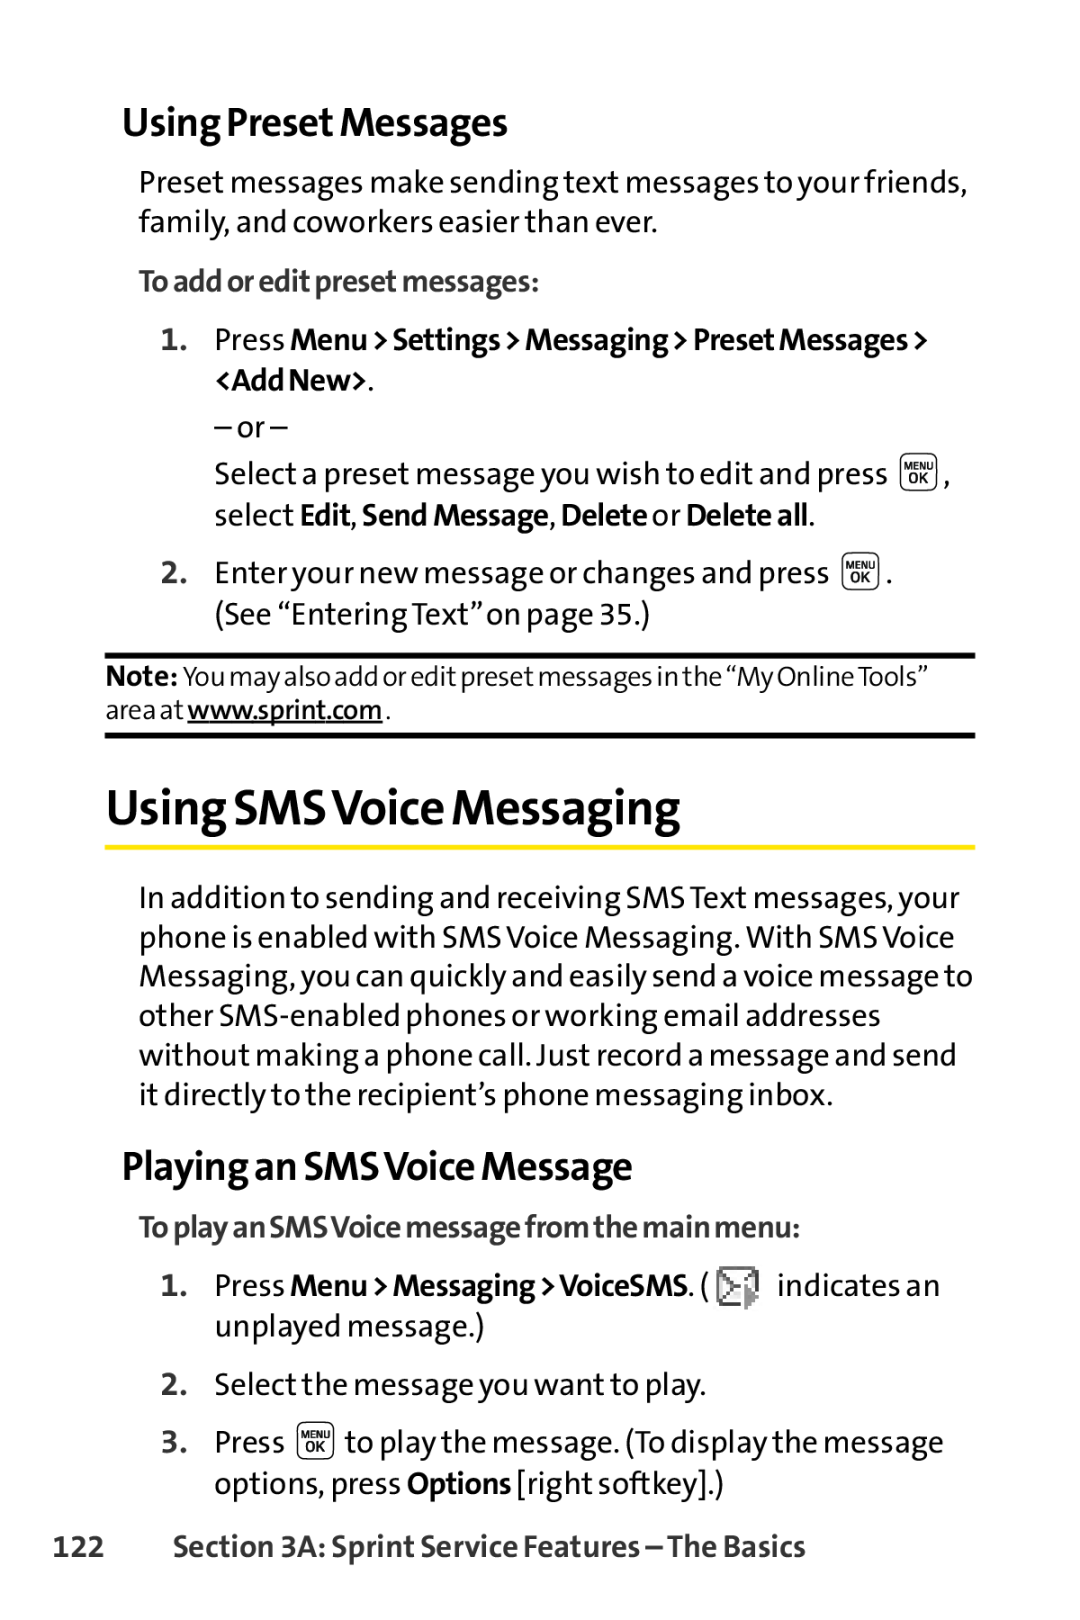 Sprint Nextel LX160 Using SMSVoice Messaging, Using PresetMessages, Playing an SMSVoice Message, Toaddoreditpresetmessages 